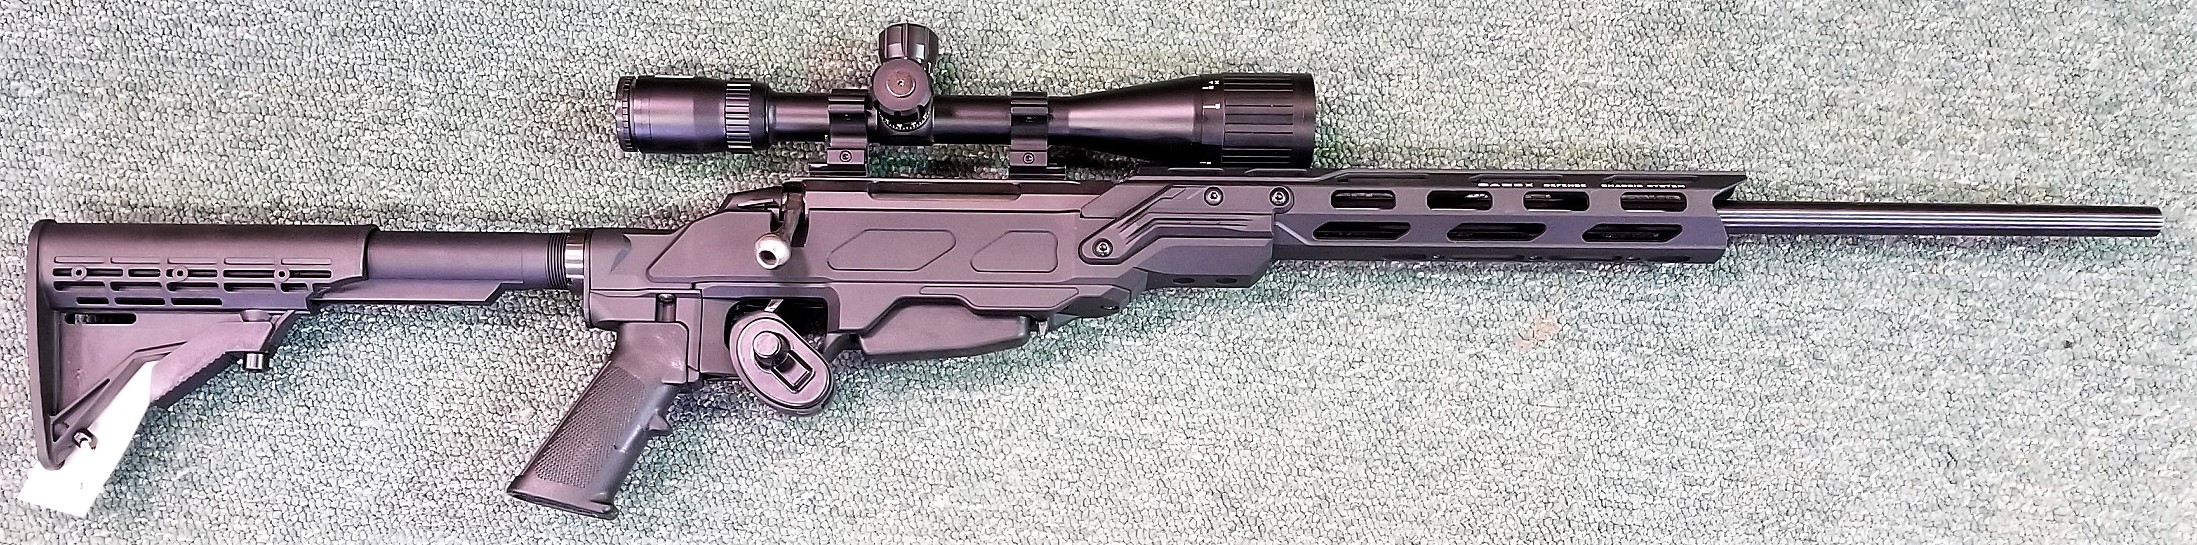 Tikka T3 in a Cadex Stock with scope .223 rem